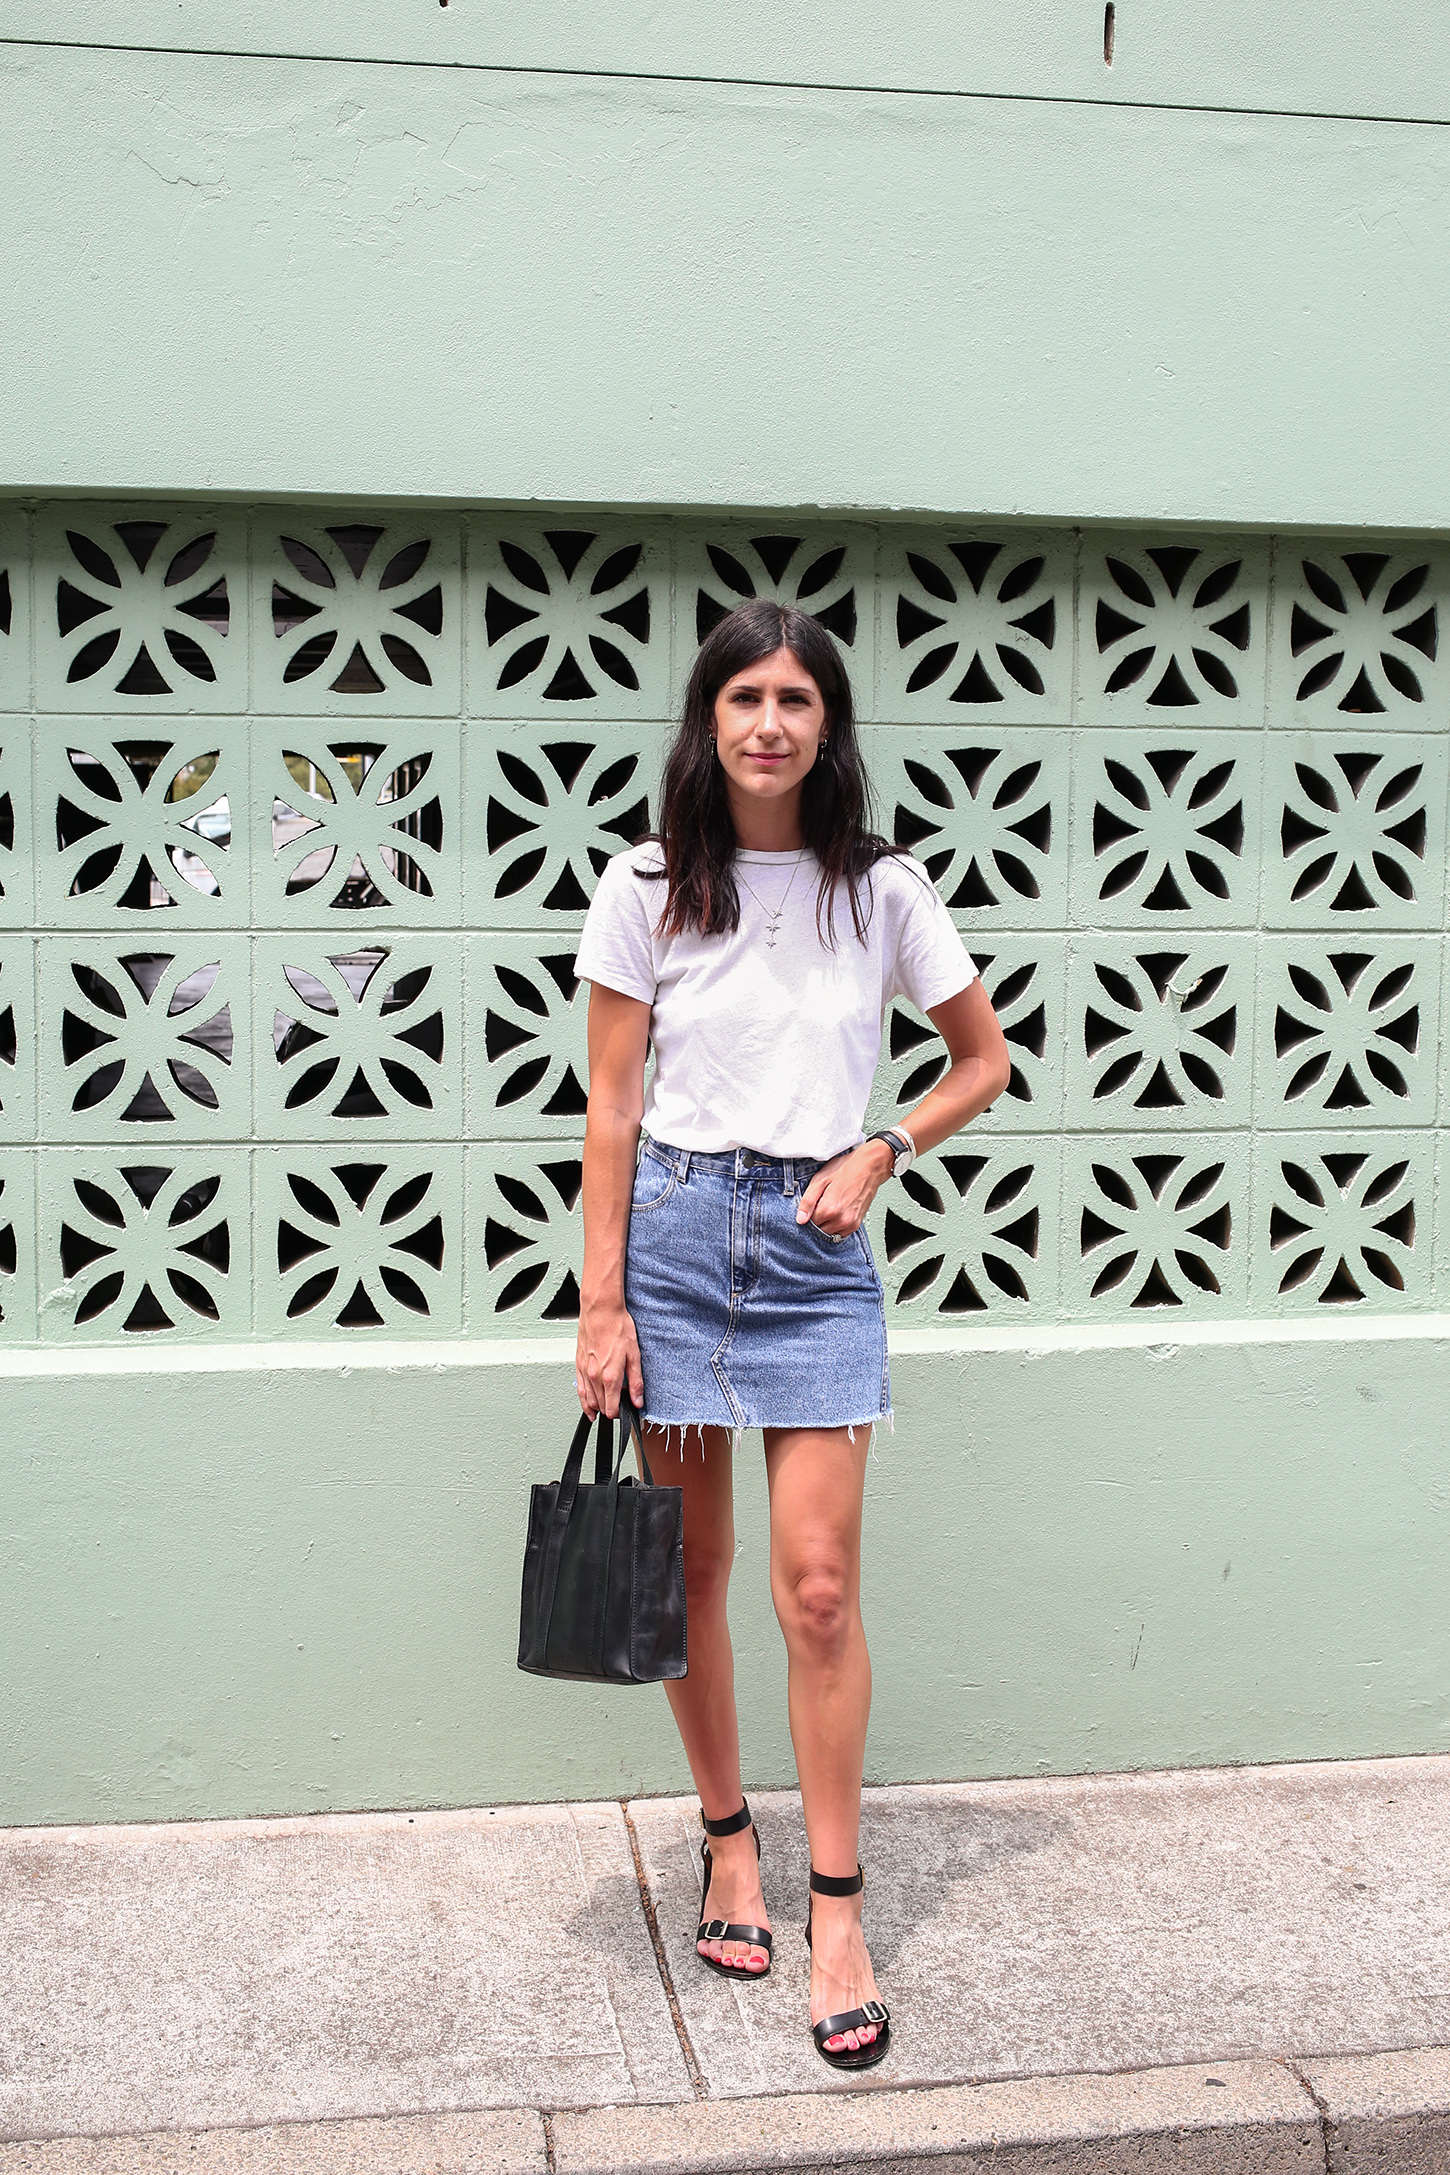 Friday Finds wearing a white tee and denim skirt